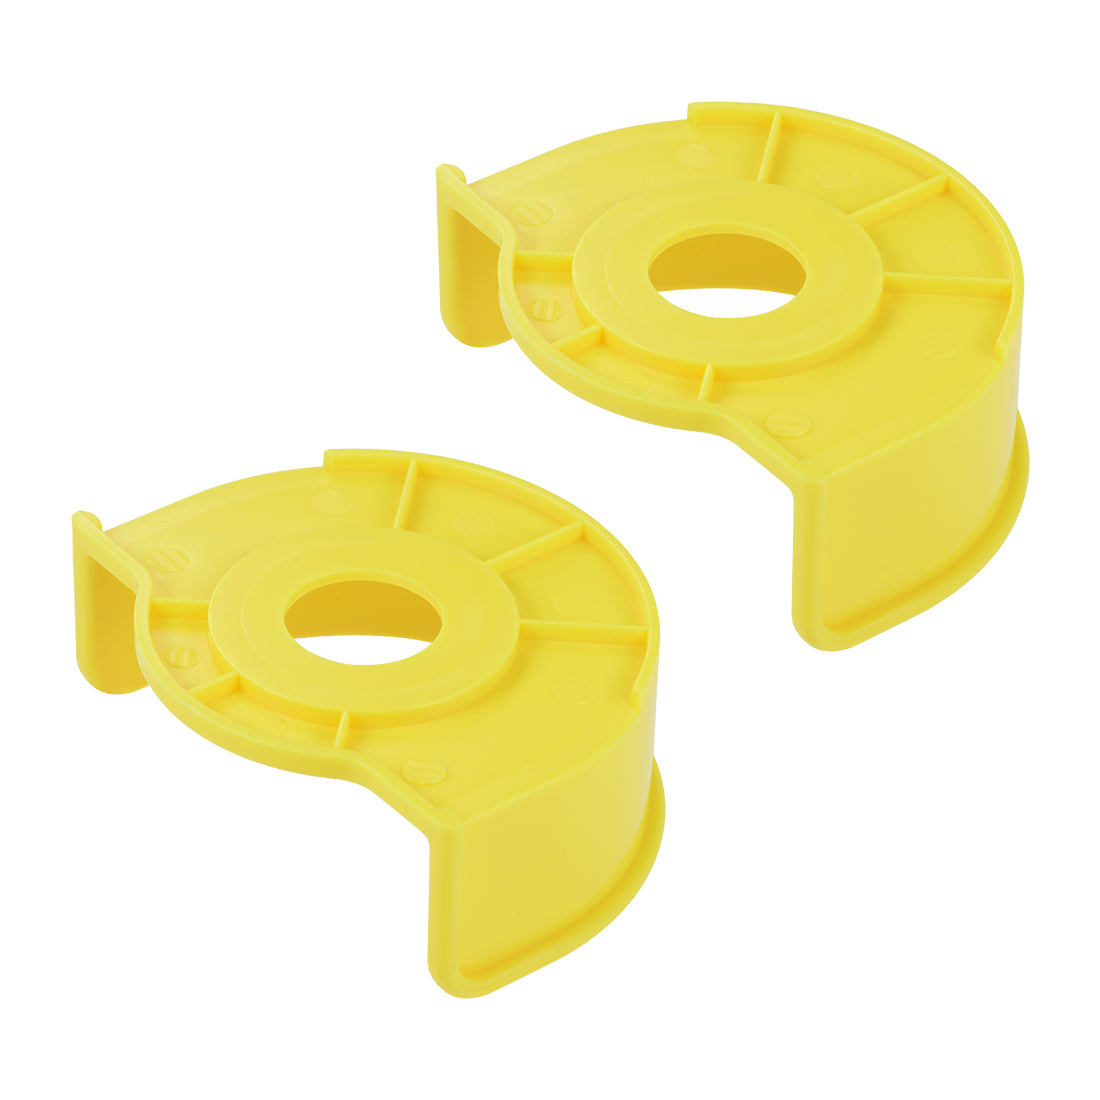 Uxcell Uxcell 22mm Half Circle Emergency Stop Switch Push Switch Button Protective Cover Yellow 2pcs